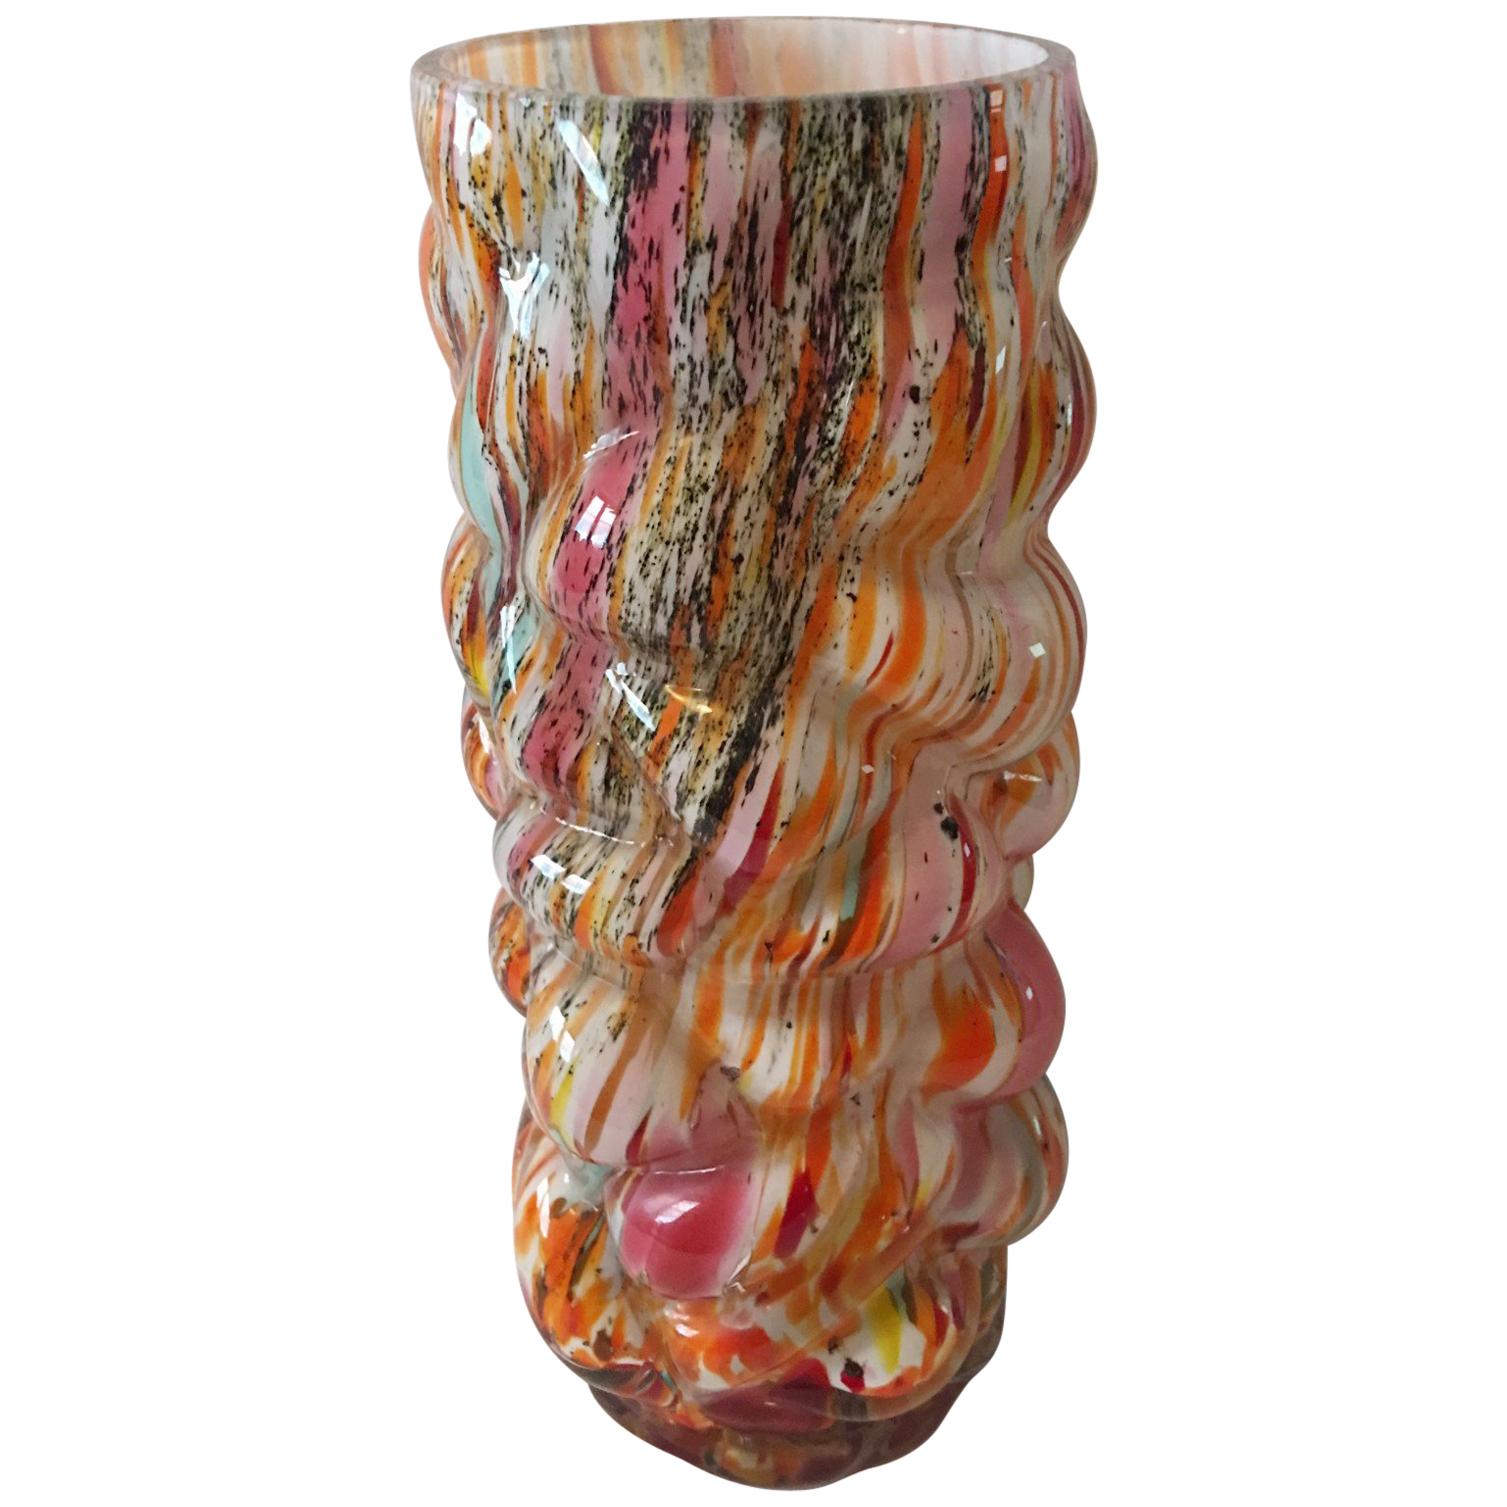 Multi-Color Hand Blown Murano Glass Vase from 1960s Italy im Angebot